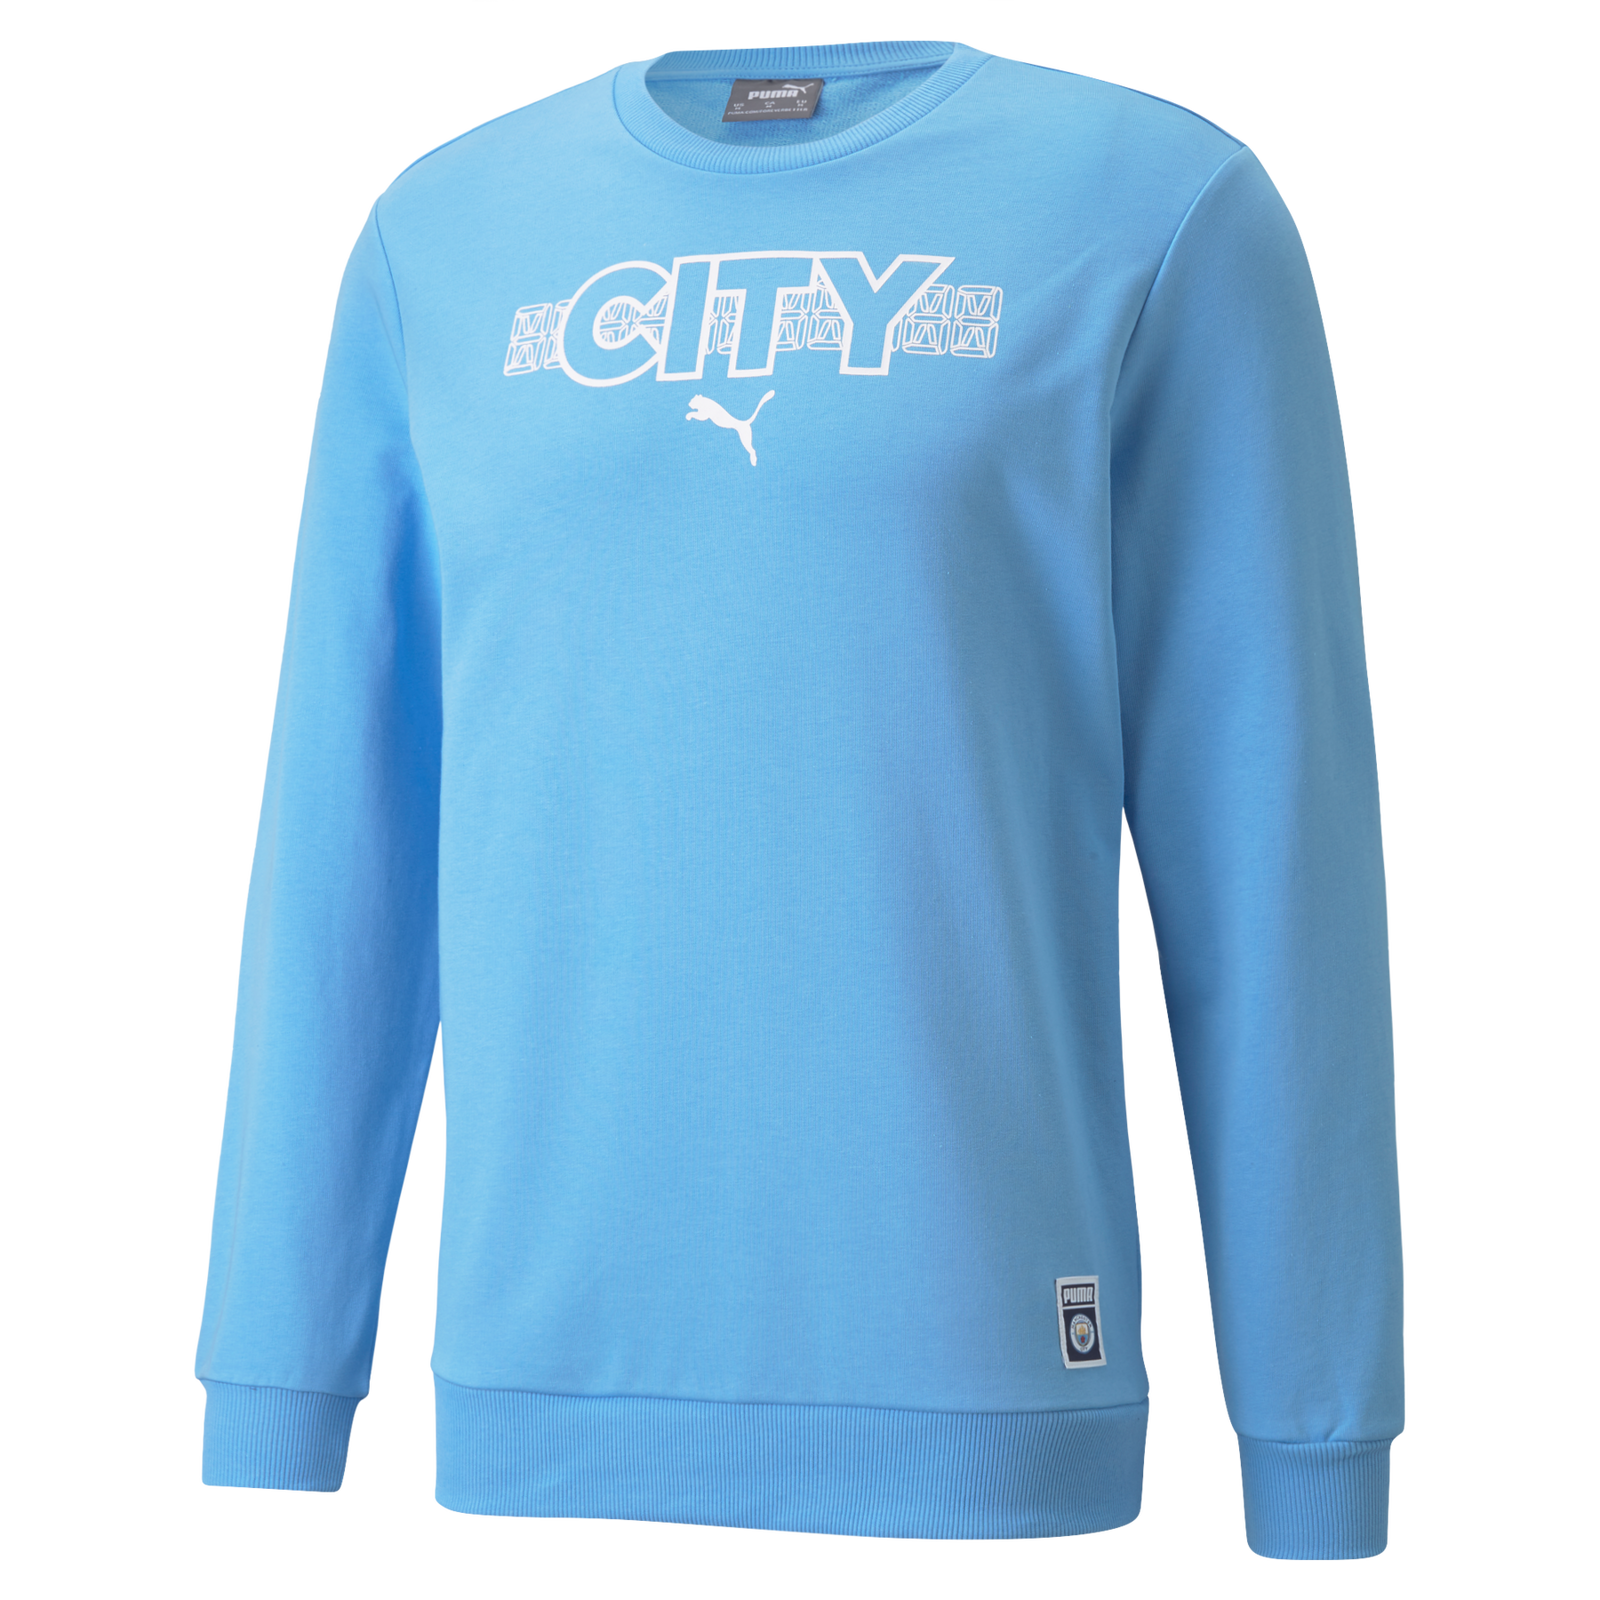 fiesta personalidad pago Manchester City FtblCore Sweater | Official Man City Store